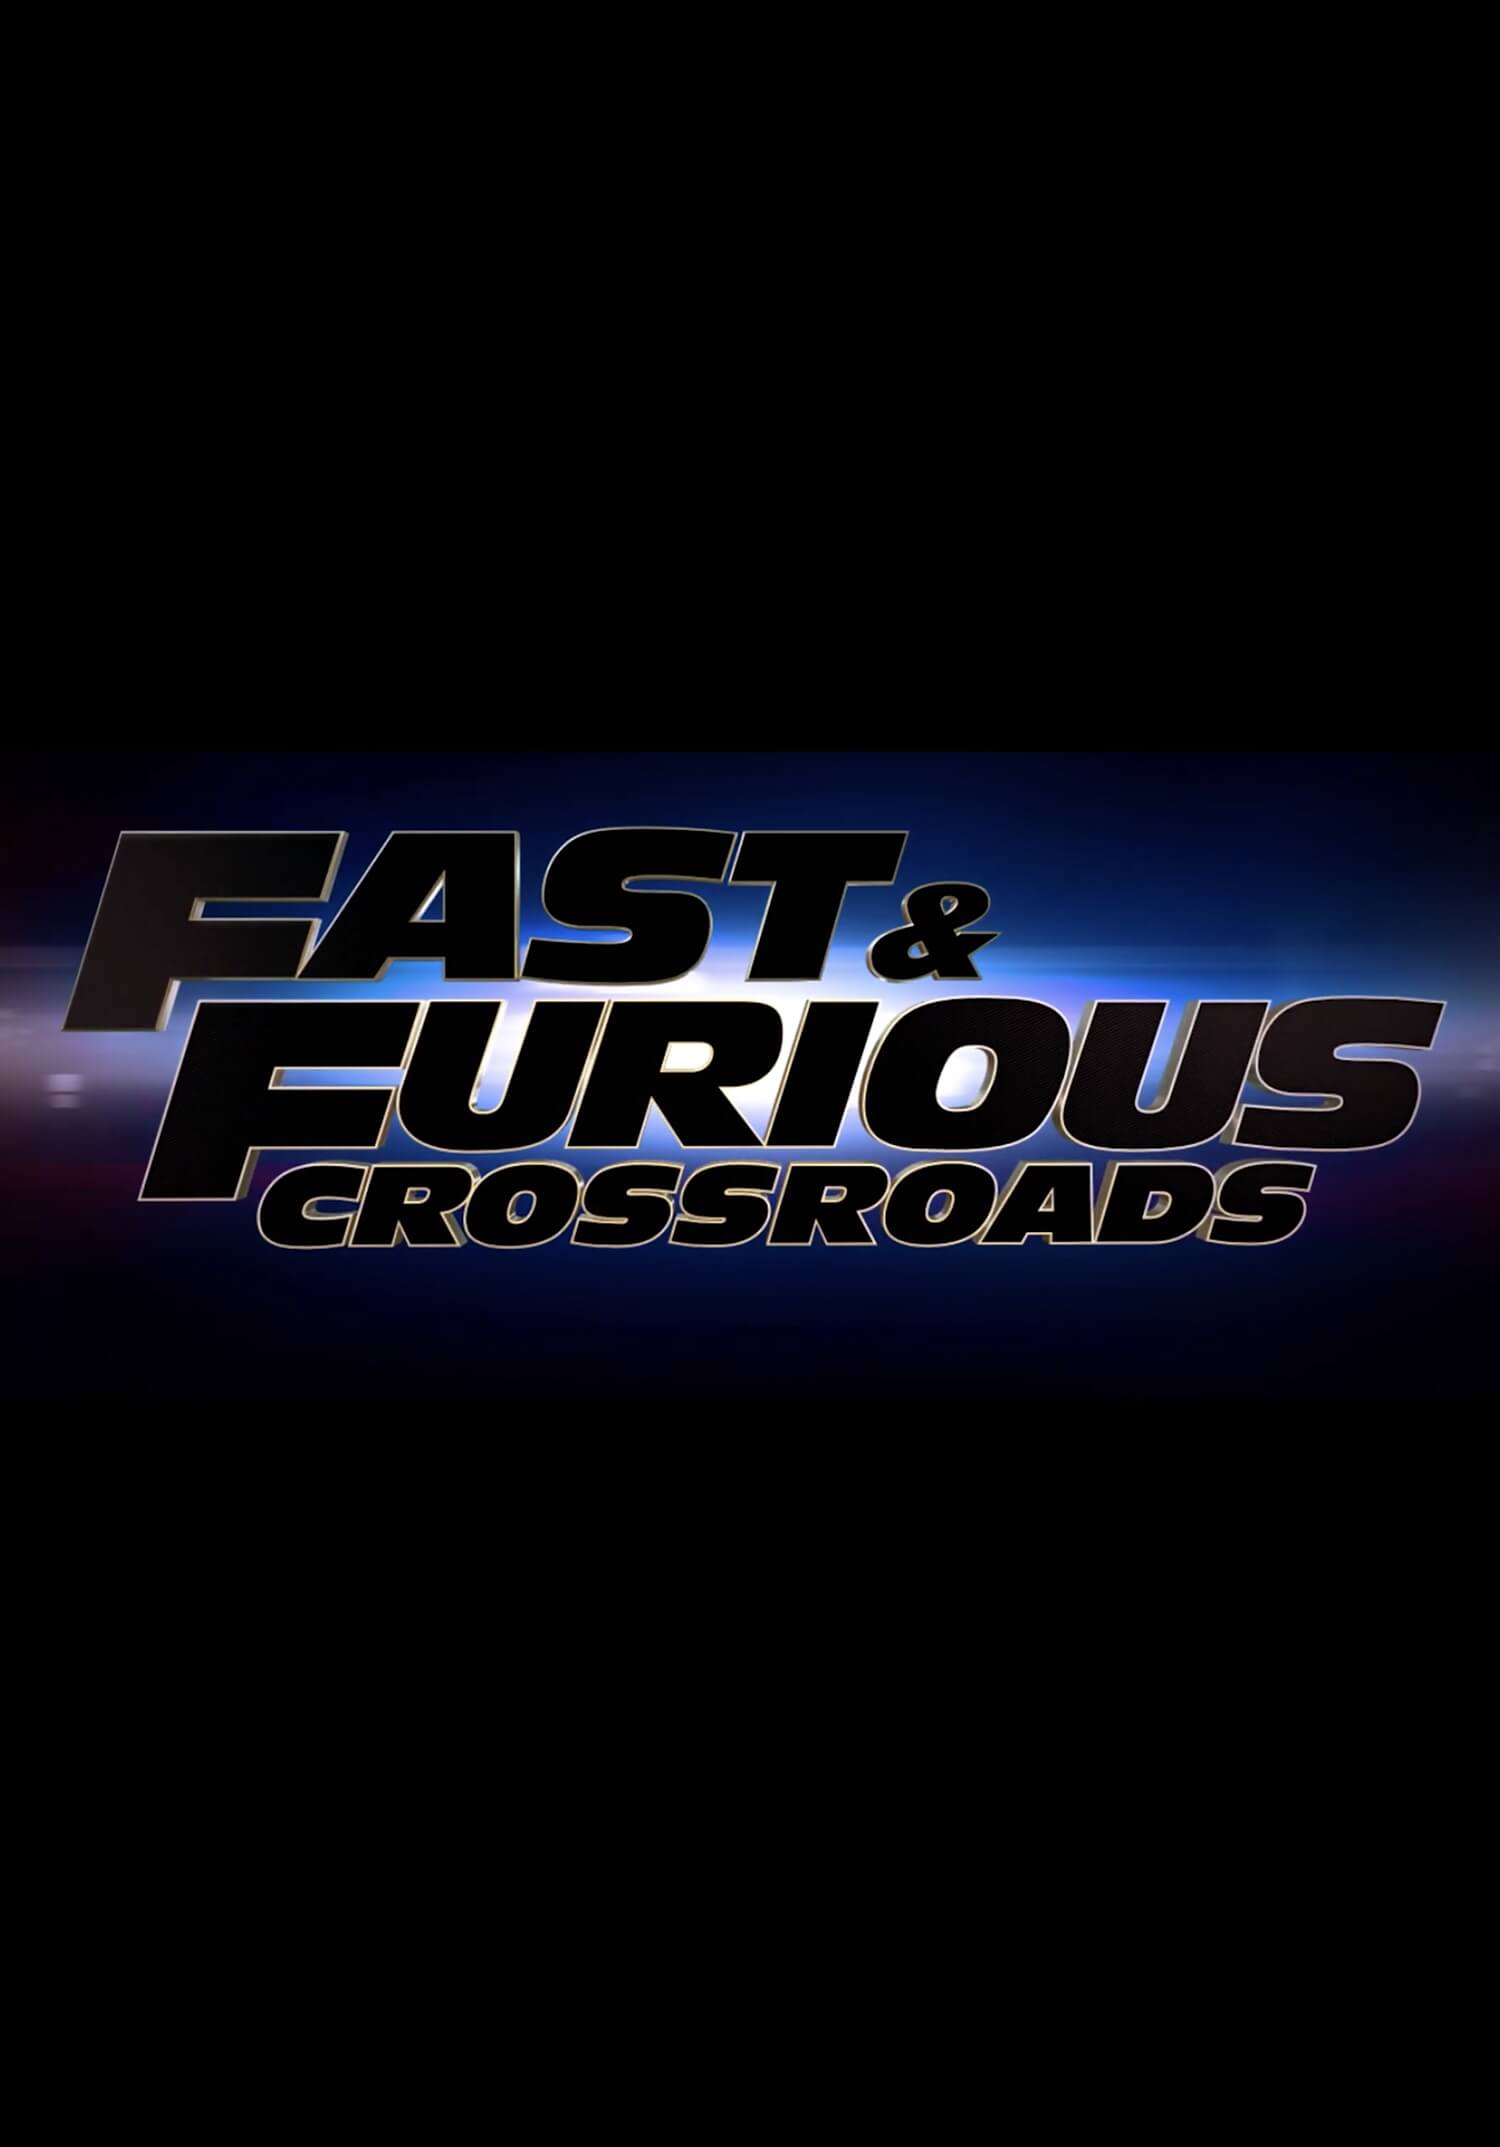 free download fast and furious crossroads game